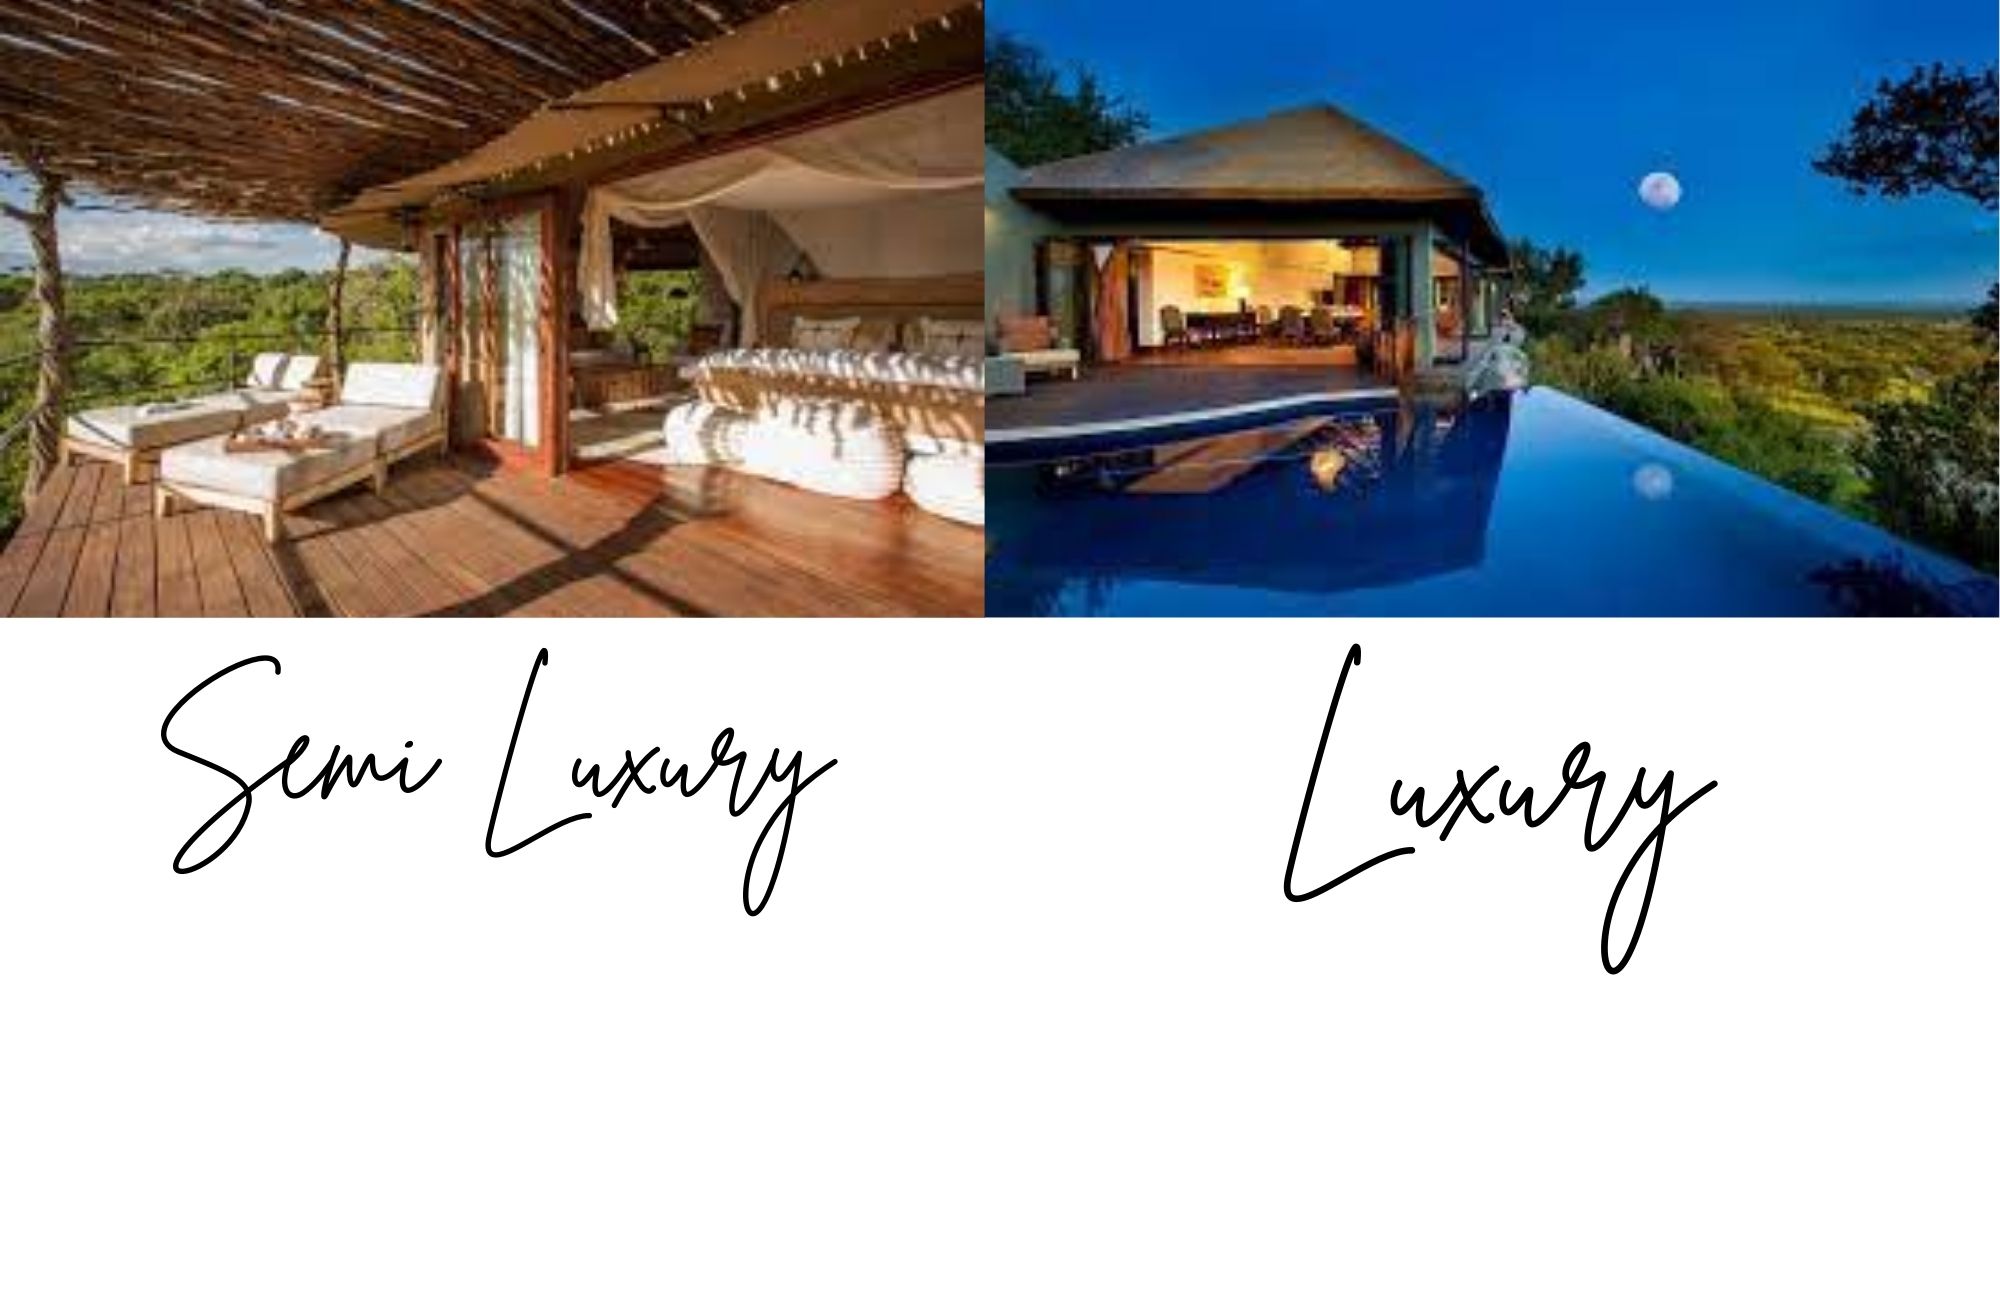 The semi-luxurious lodge on the left and the luxury lodge on the right